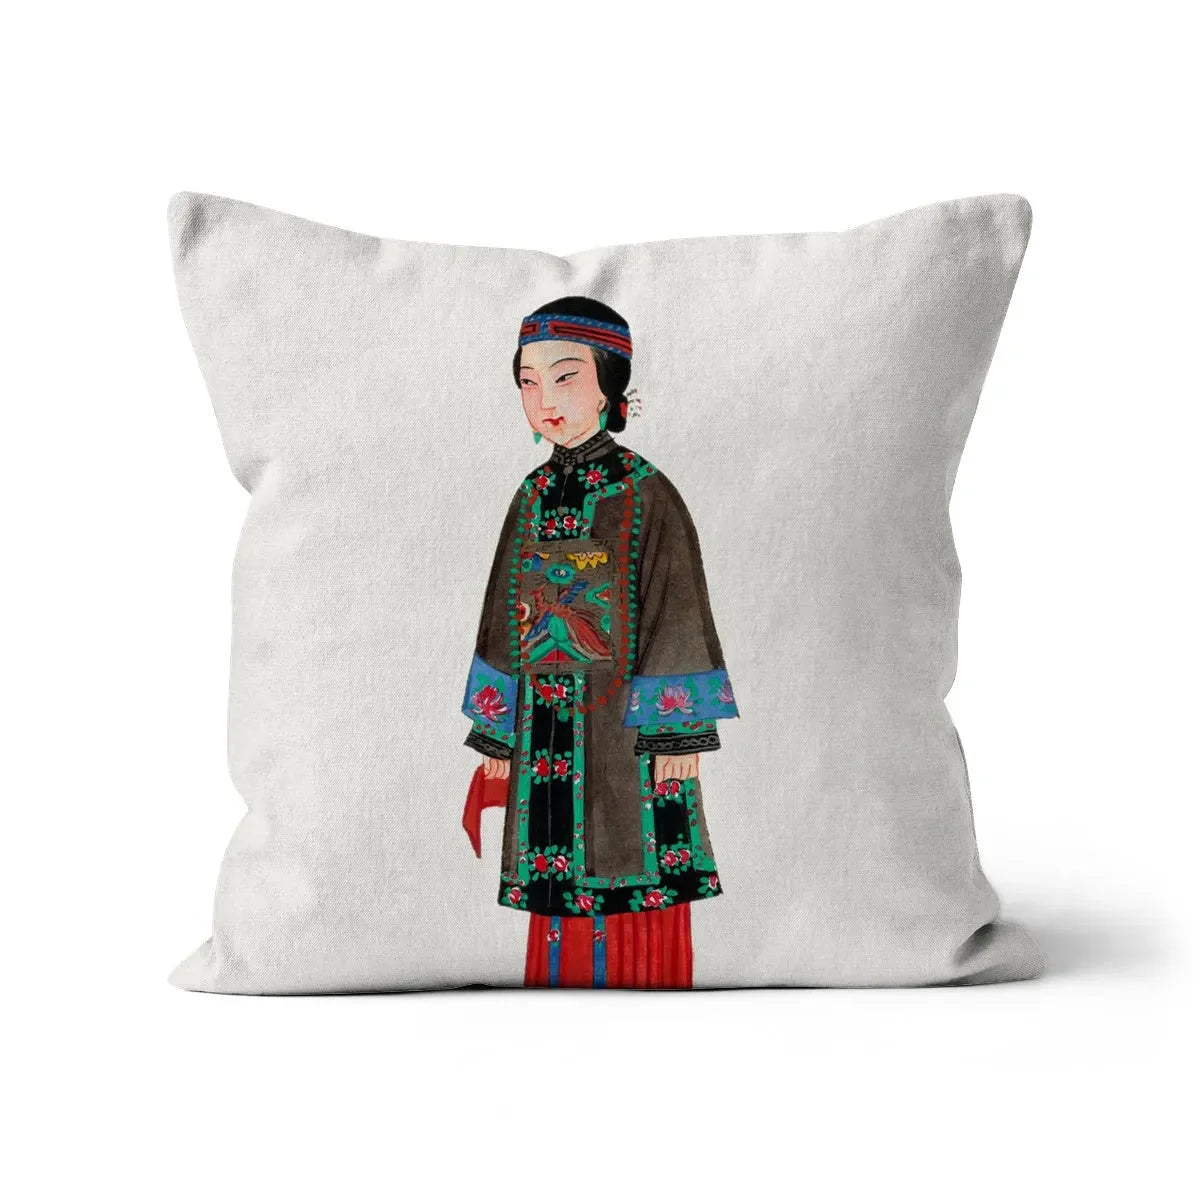 Chinese Noblewoman At Court Cushion - Linen / 16’x16’ - Throw Pillows - Aesthetic Art